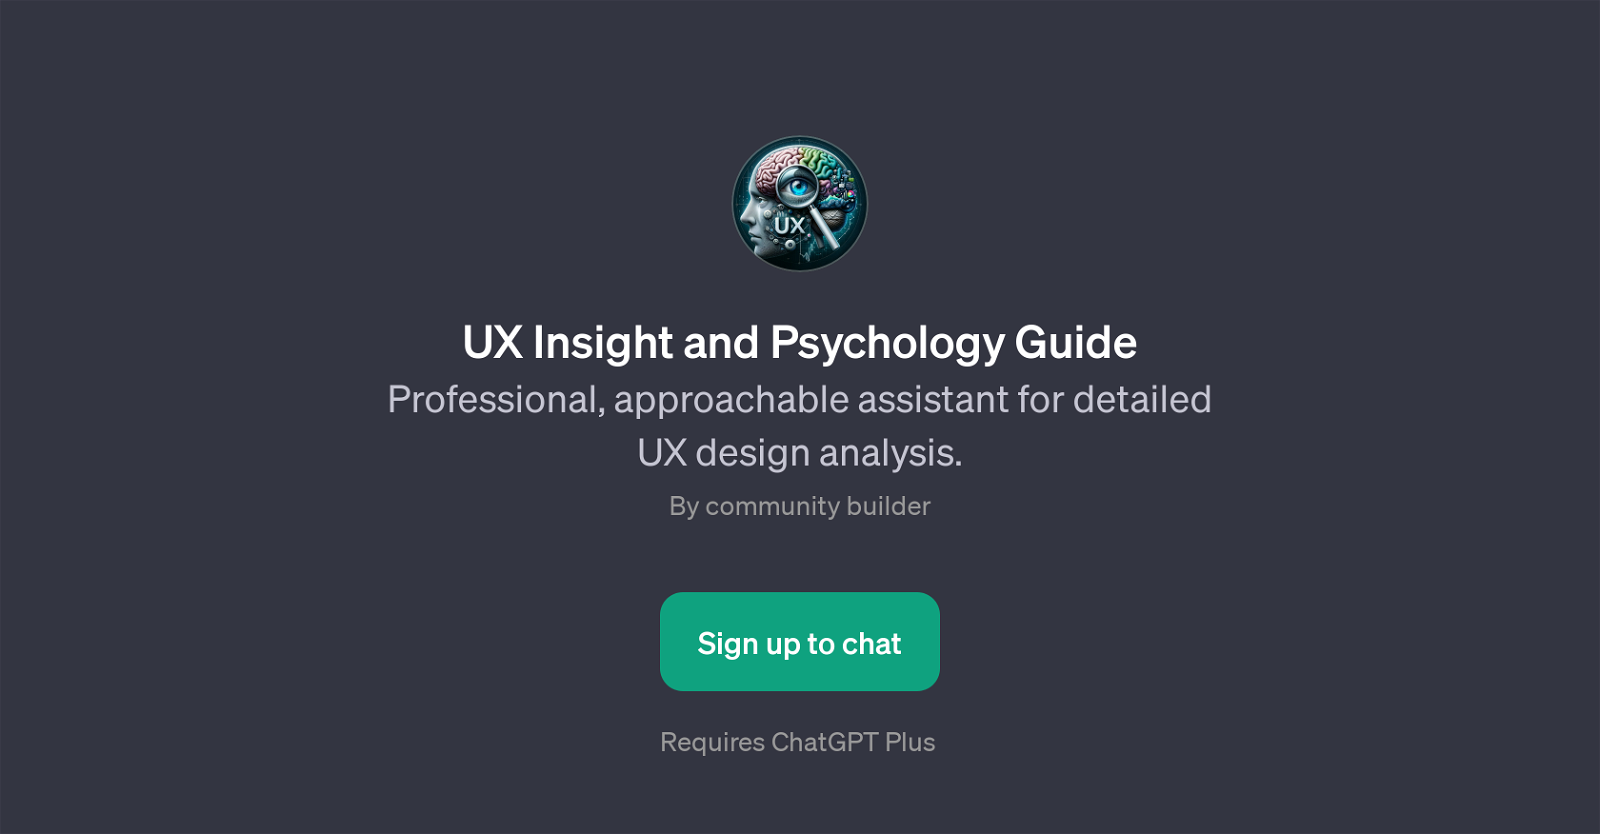 UX Insight and Psychology Guide website